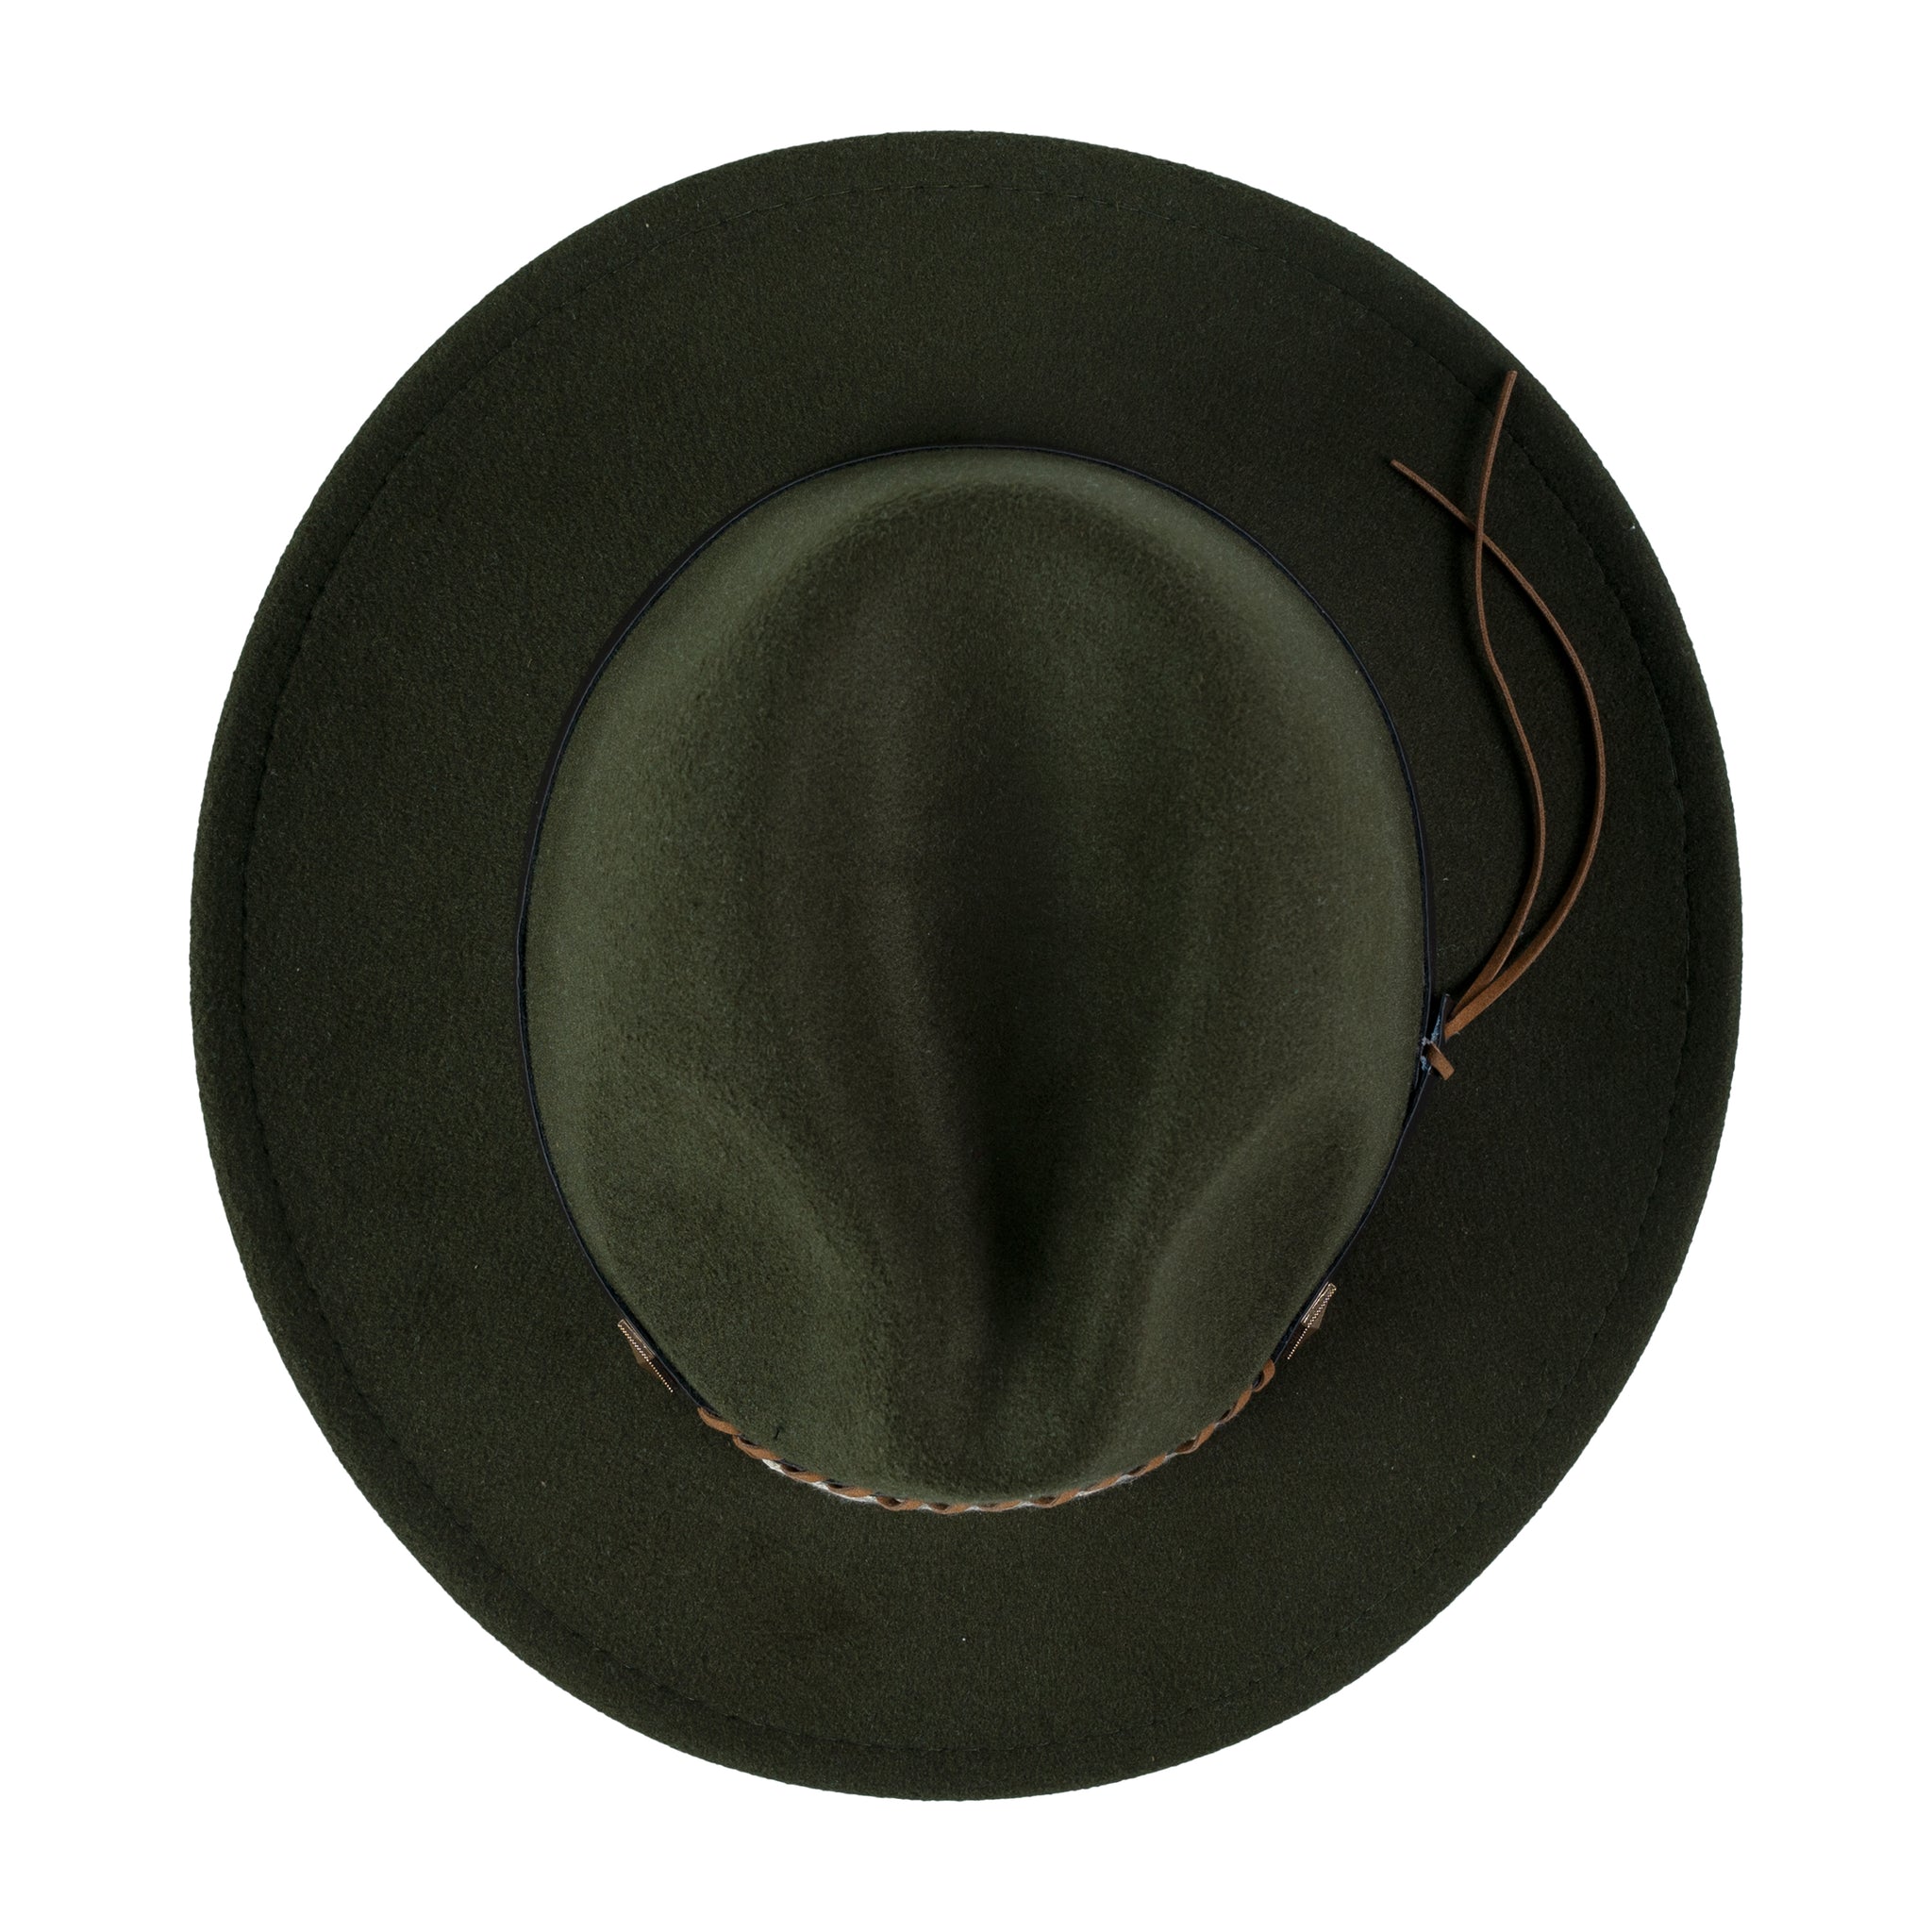 Chokore Fedora Hat with Braided PU Leather Belt (Forest Green)